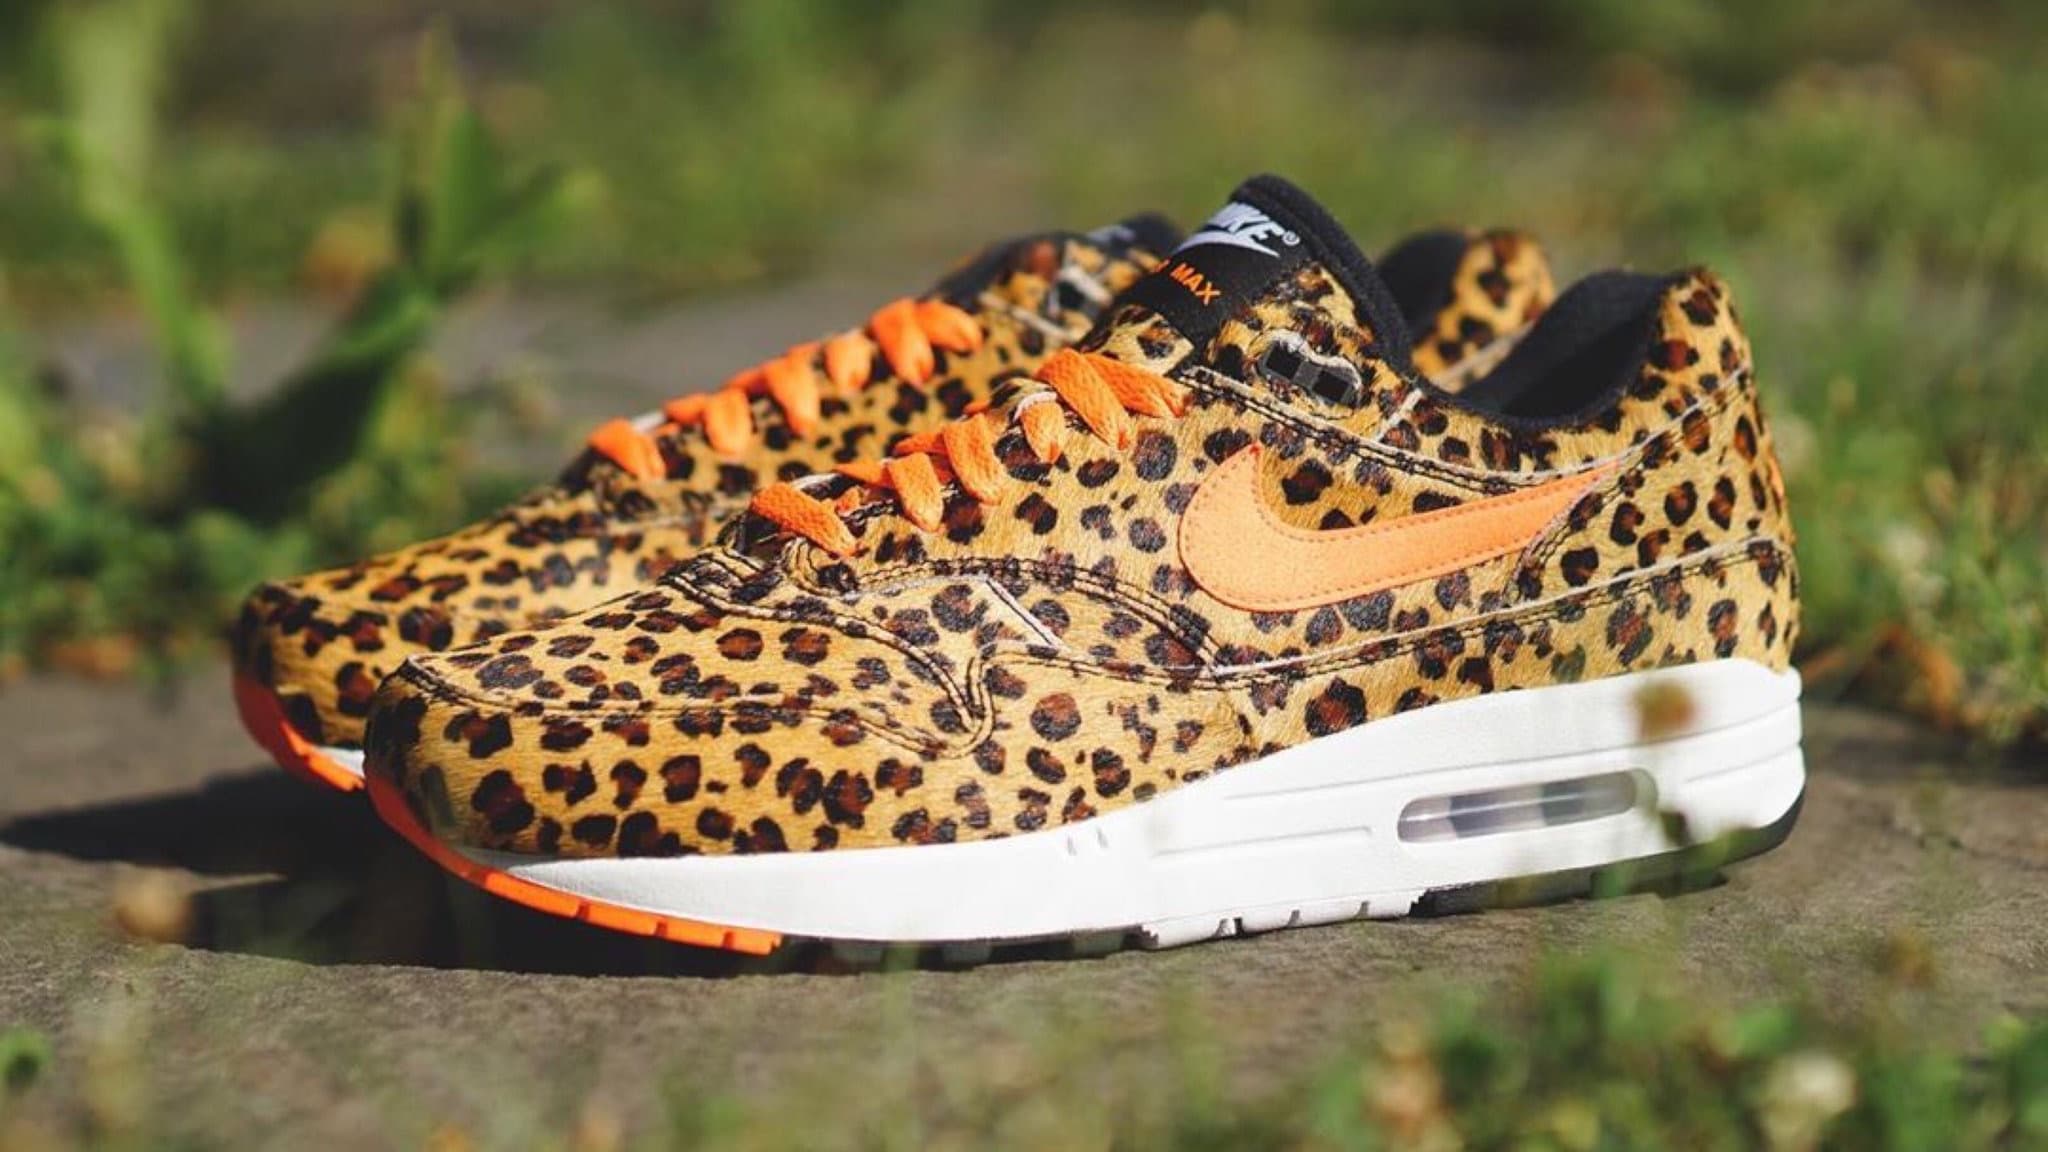 Atmos' Nike Air Max 1 'Animal 3.0' Pack Is Dropping at ComplexCon 